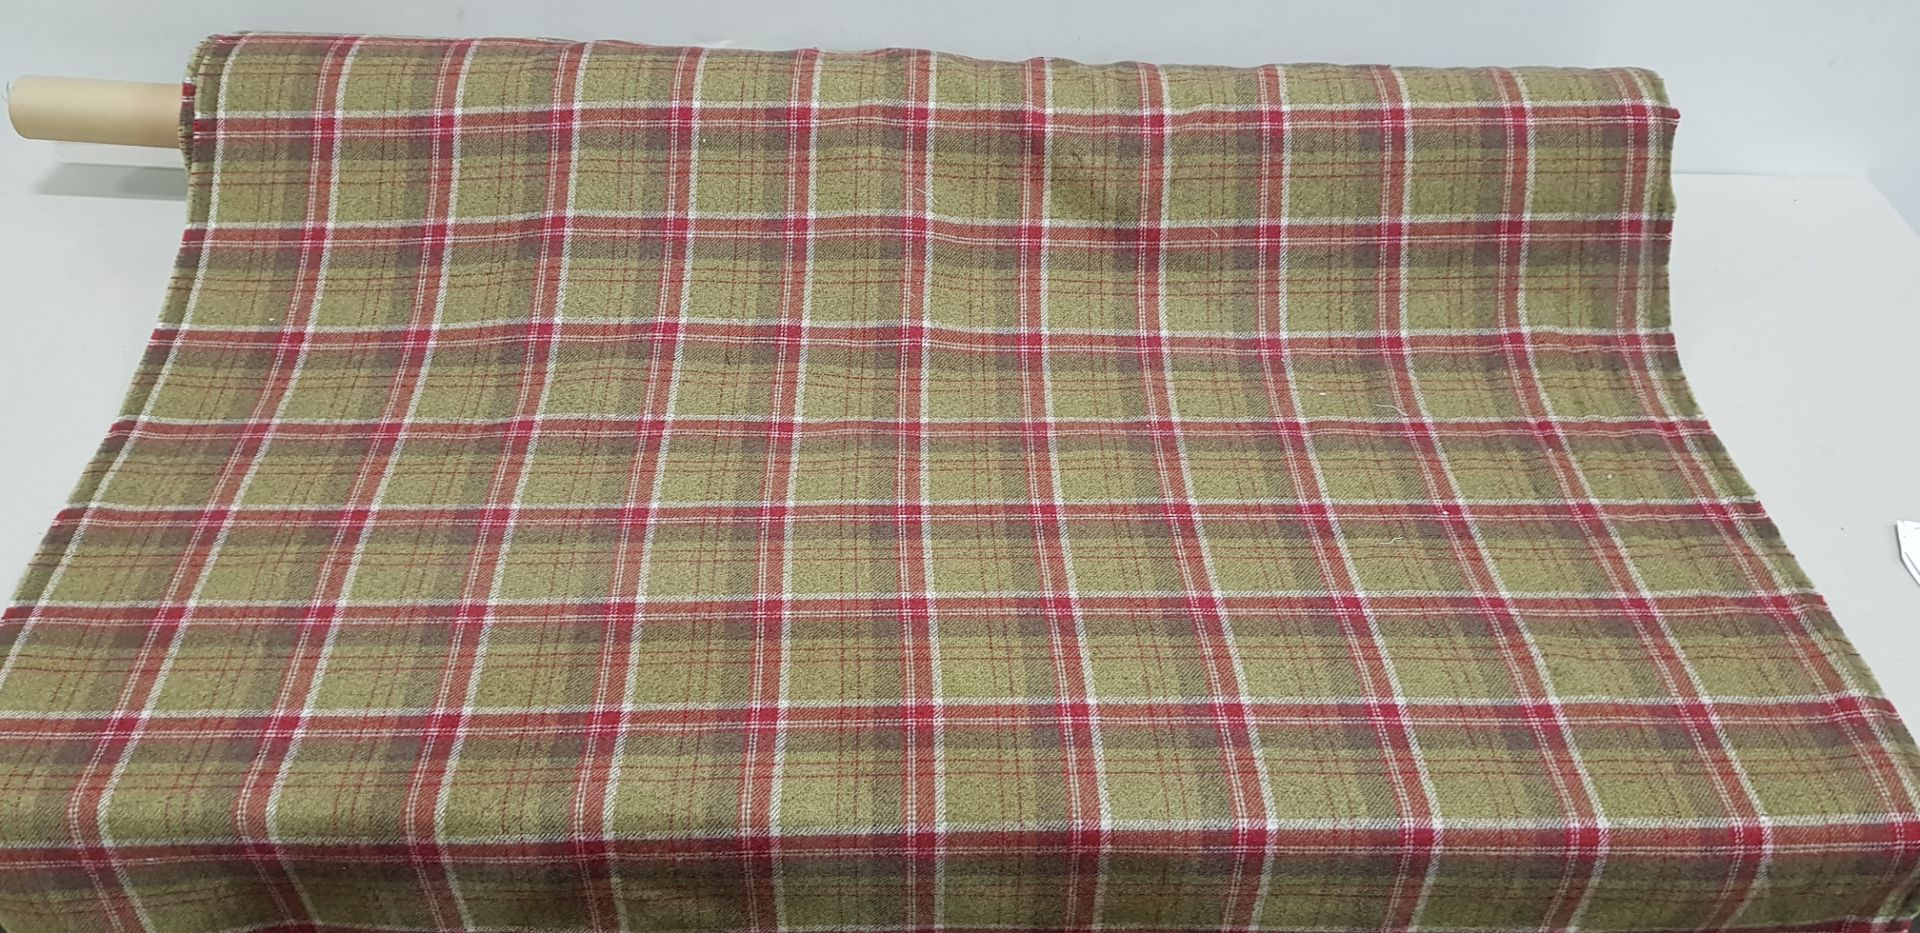 1 X ONE ROLL OF COLOUR WOVEN TAUTEN CURTAIN FABRIC BRAND - ILIV DESIGN - LANA COLOURWAY - ROUGE